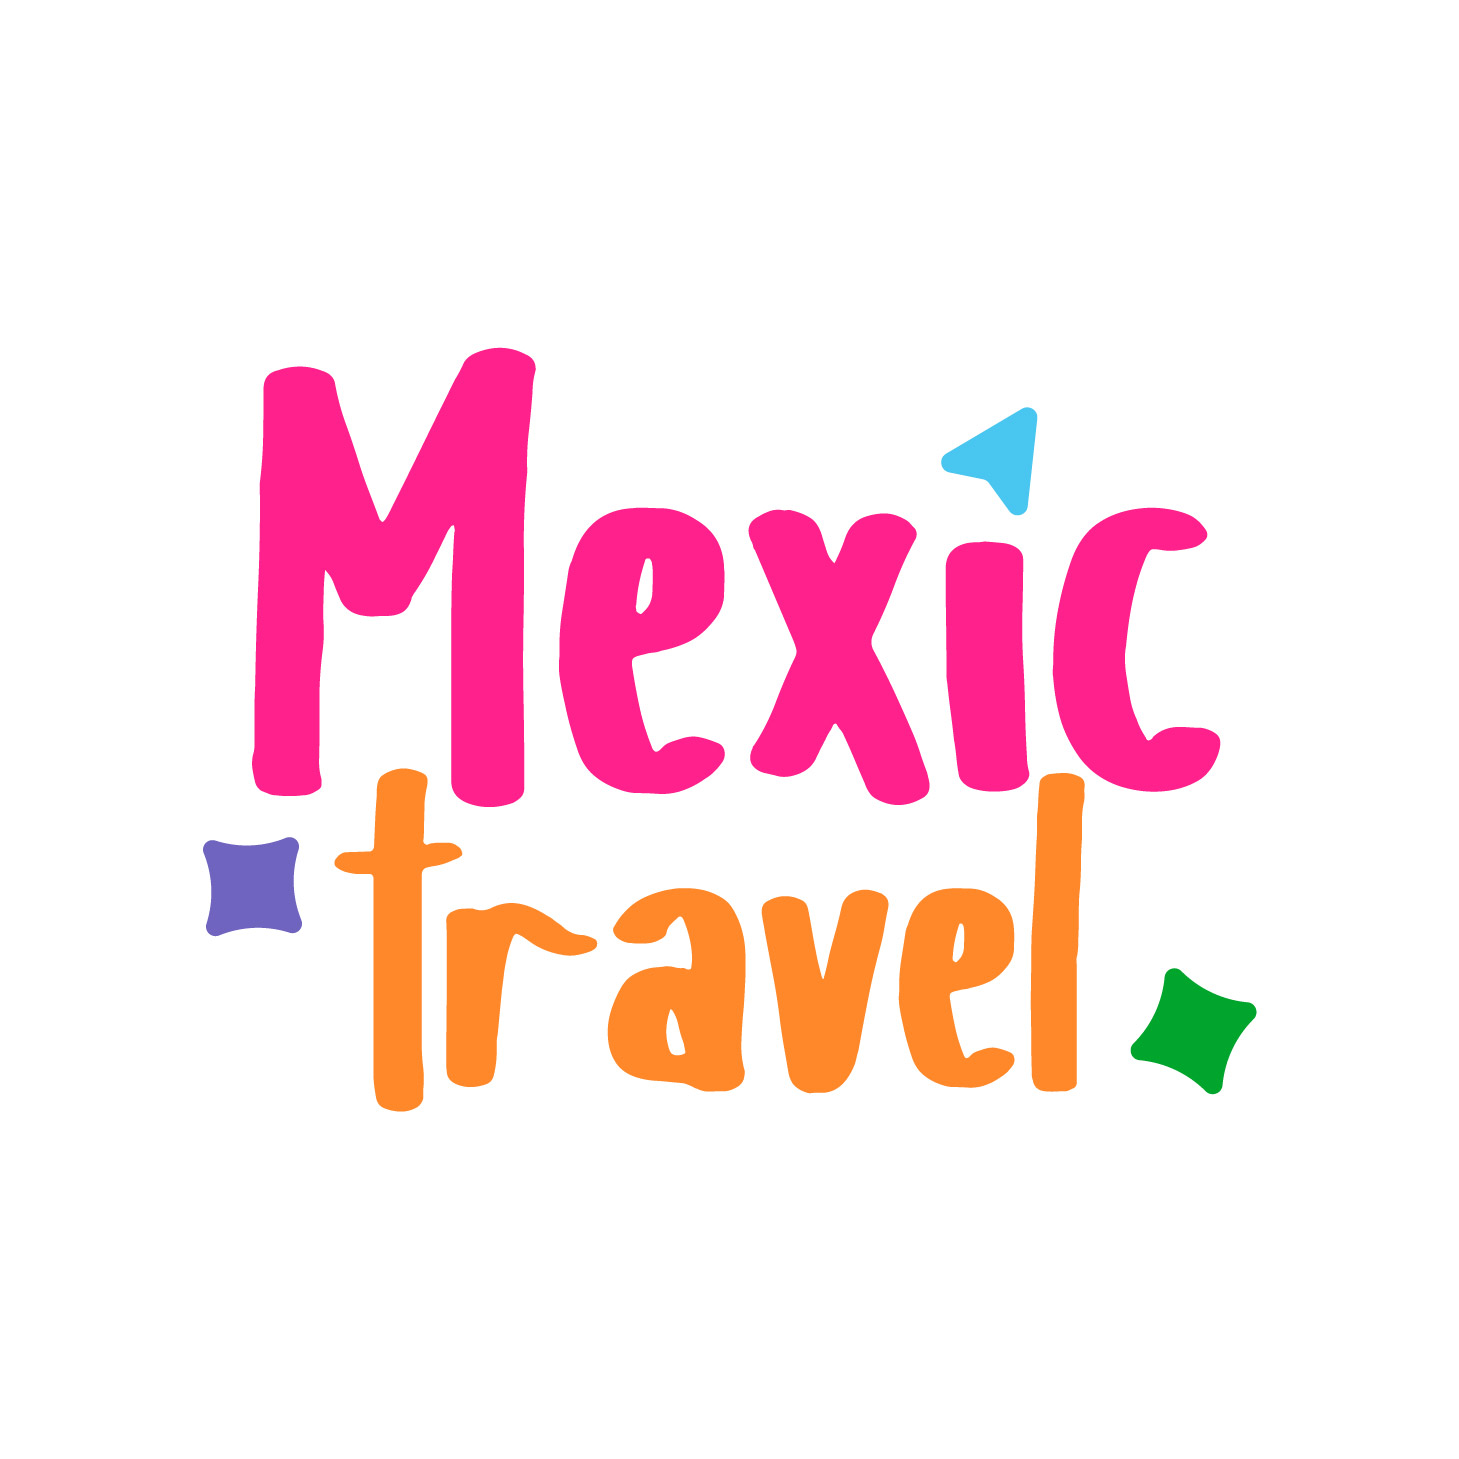 MEXICTRAVEL